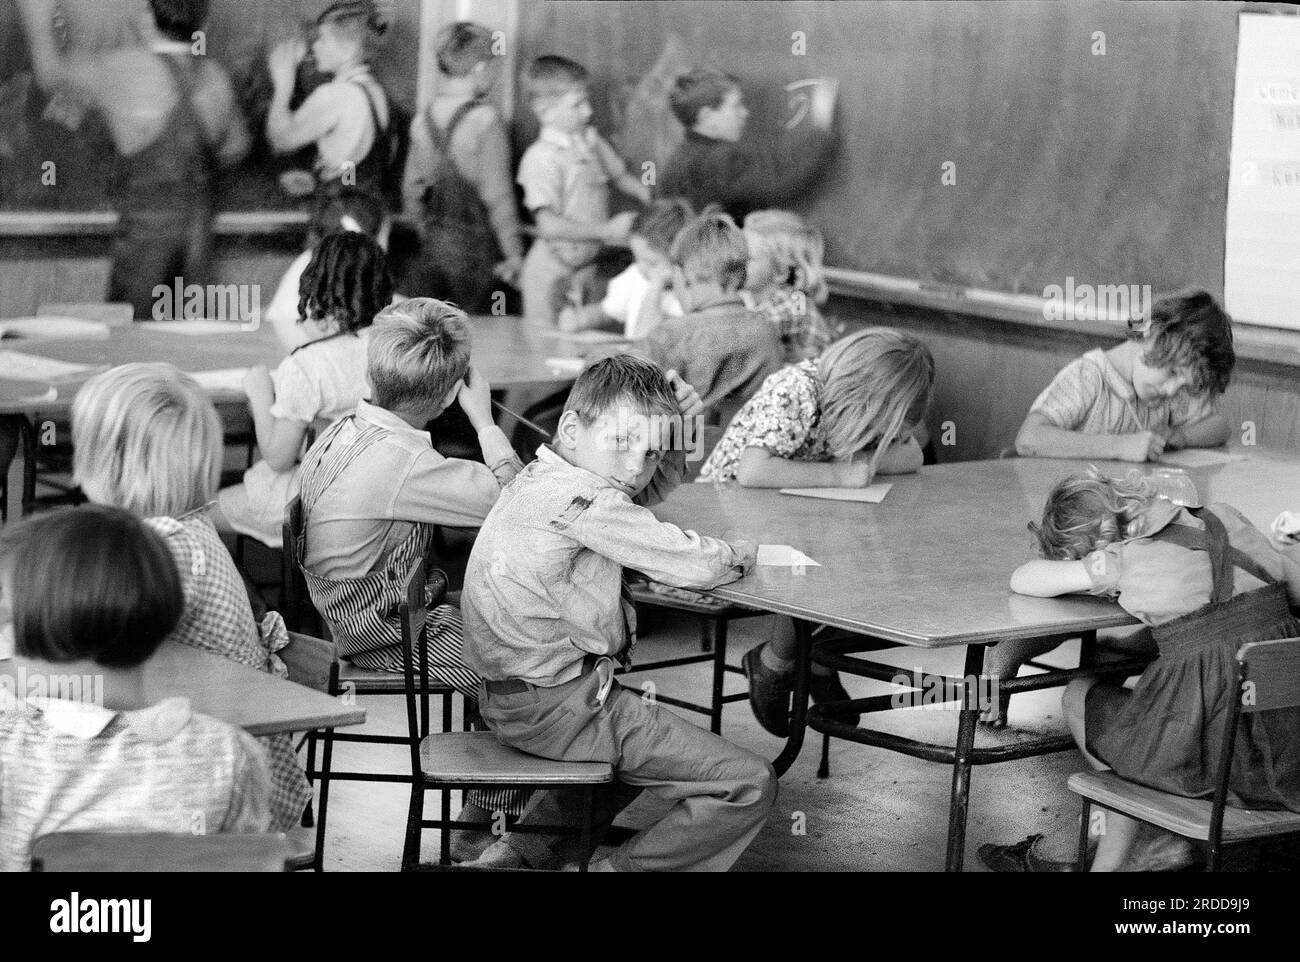 Children of migratory workers in third grad class, Farm Security Administration (FSA) migratory labor camp, Weslaco, Texas, USA, Arthur Rothstein, U.S. Farm Security Administration, February 1942 Stock Photo